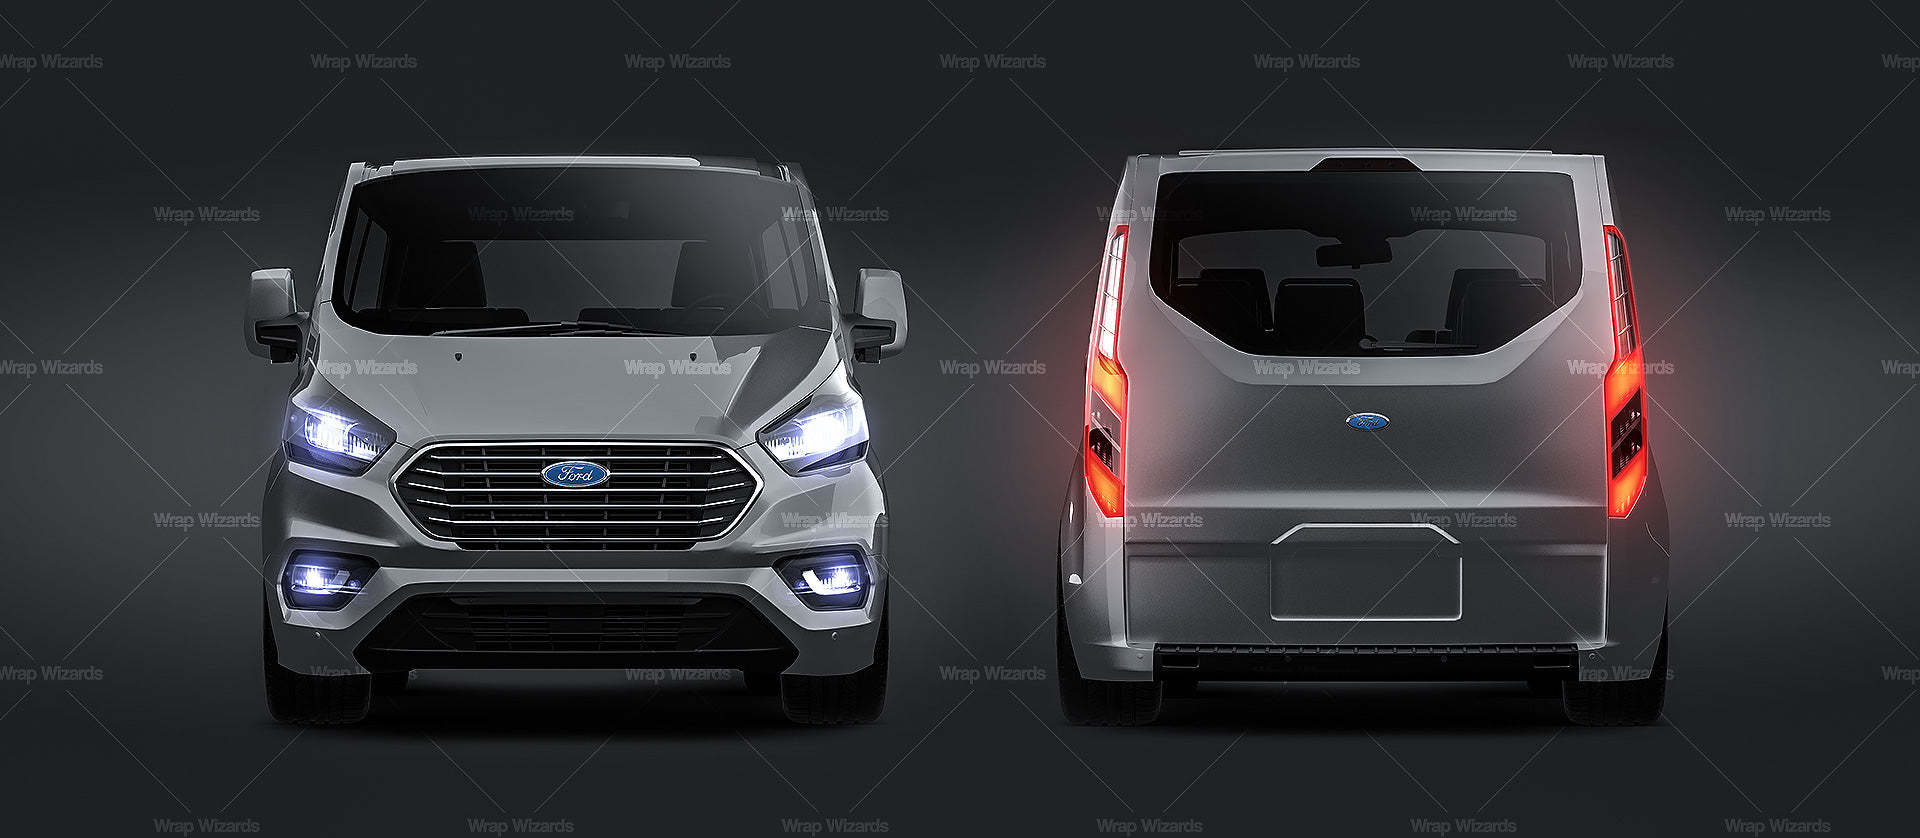 Ford Turneo L1H1 2022 glossy finish - all sides Car Mockup Template.psd